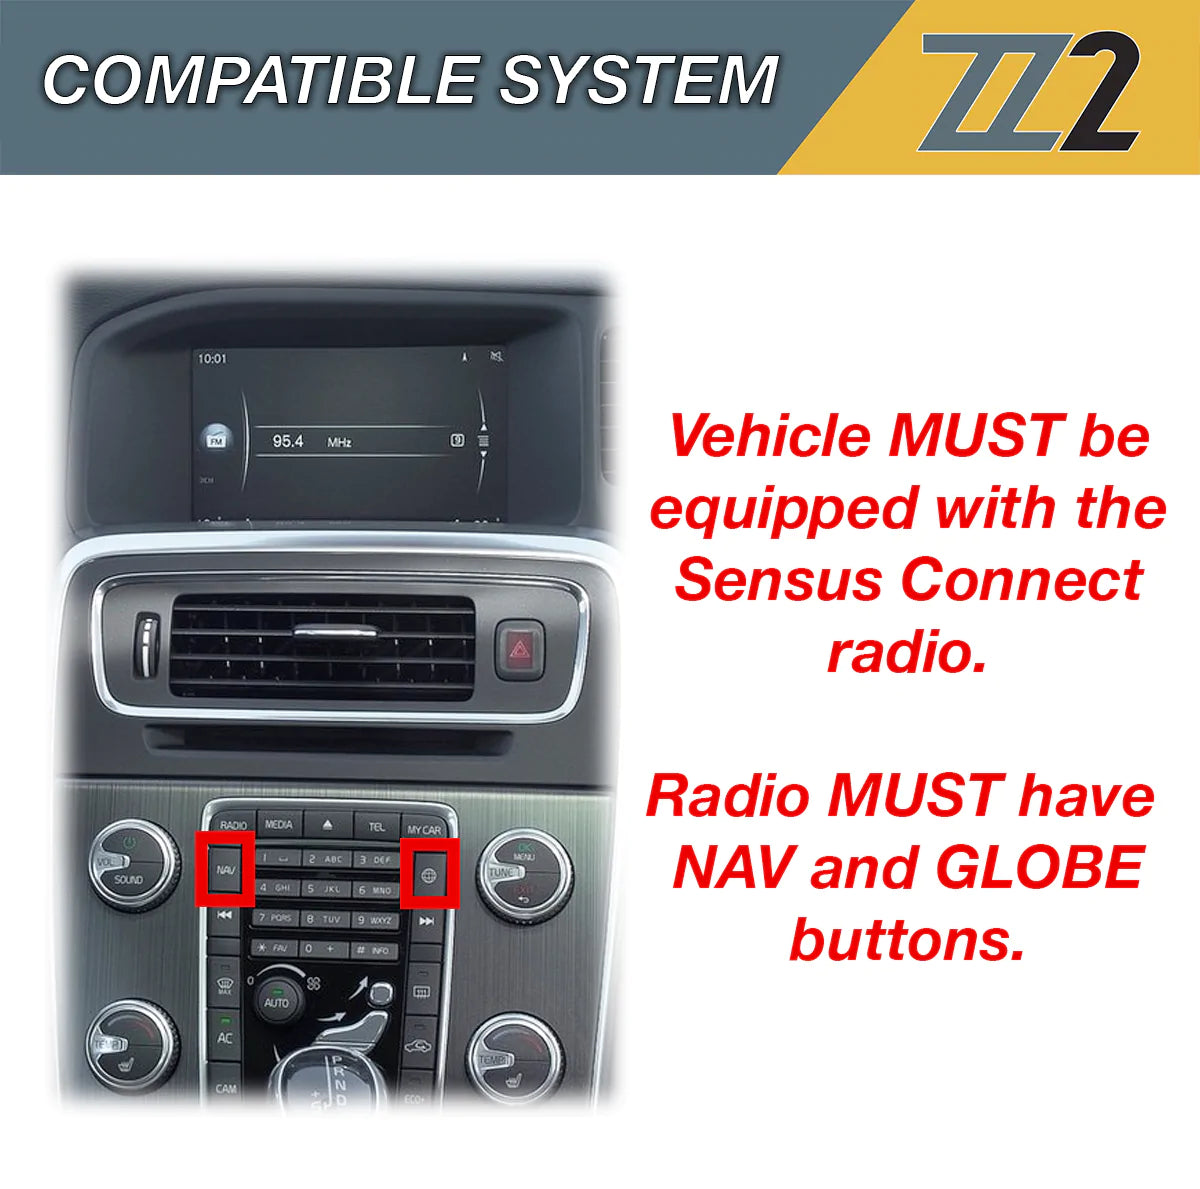 ZZ-2 IT3-VOLVO Wireless CarPlay and Android Auto Interface - Lockdown Security